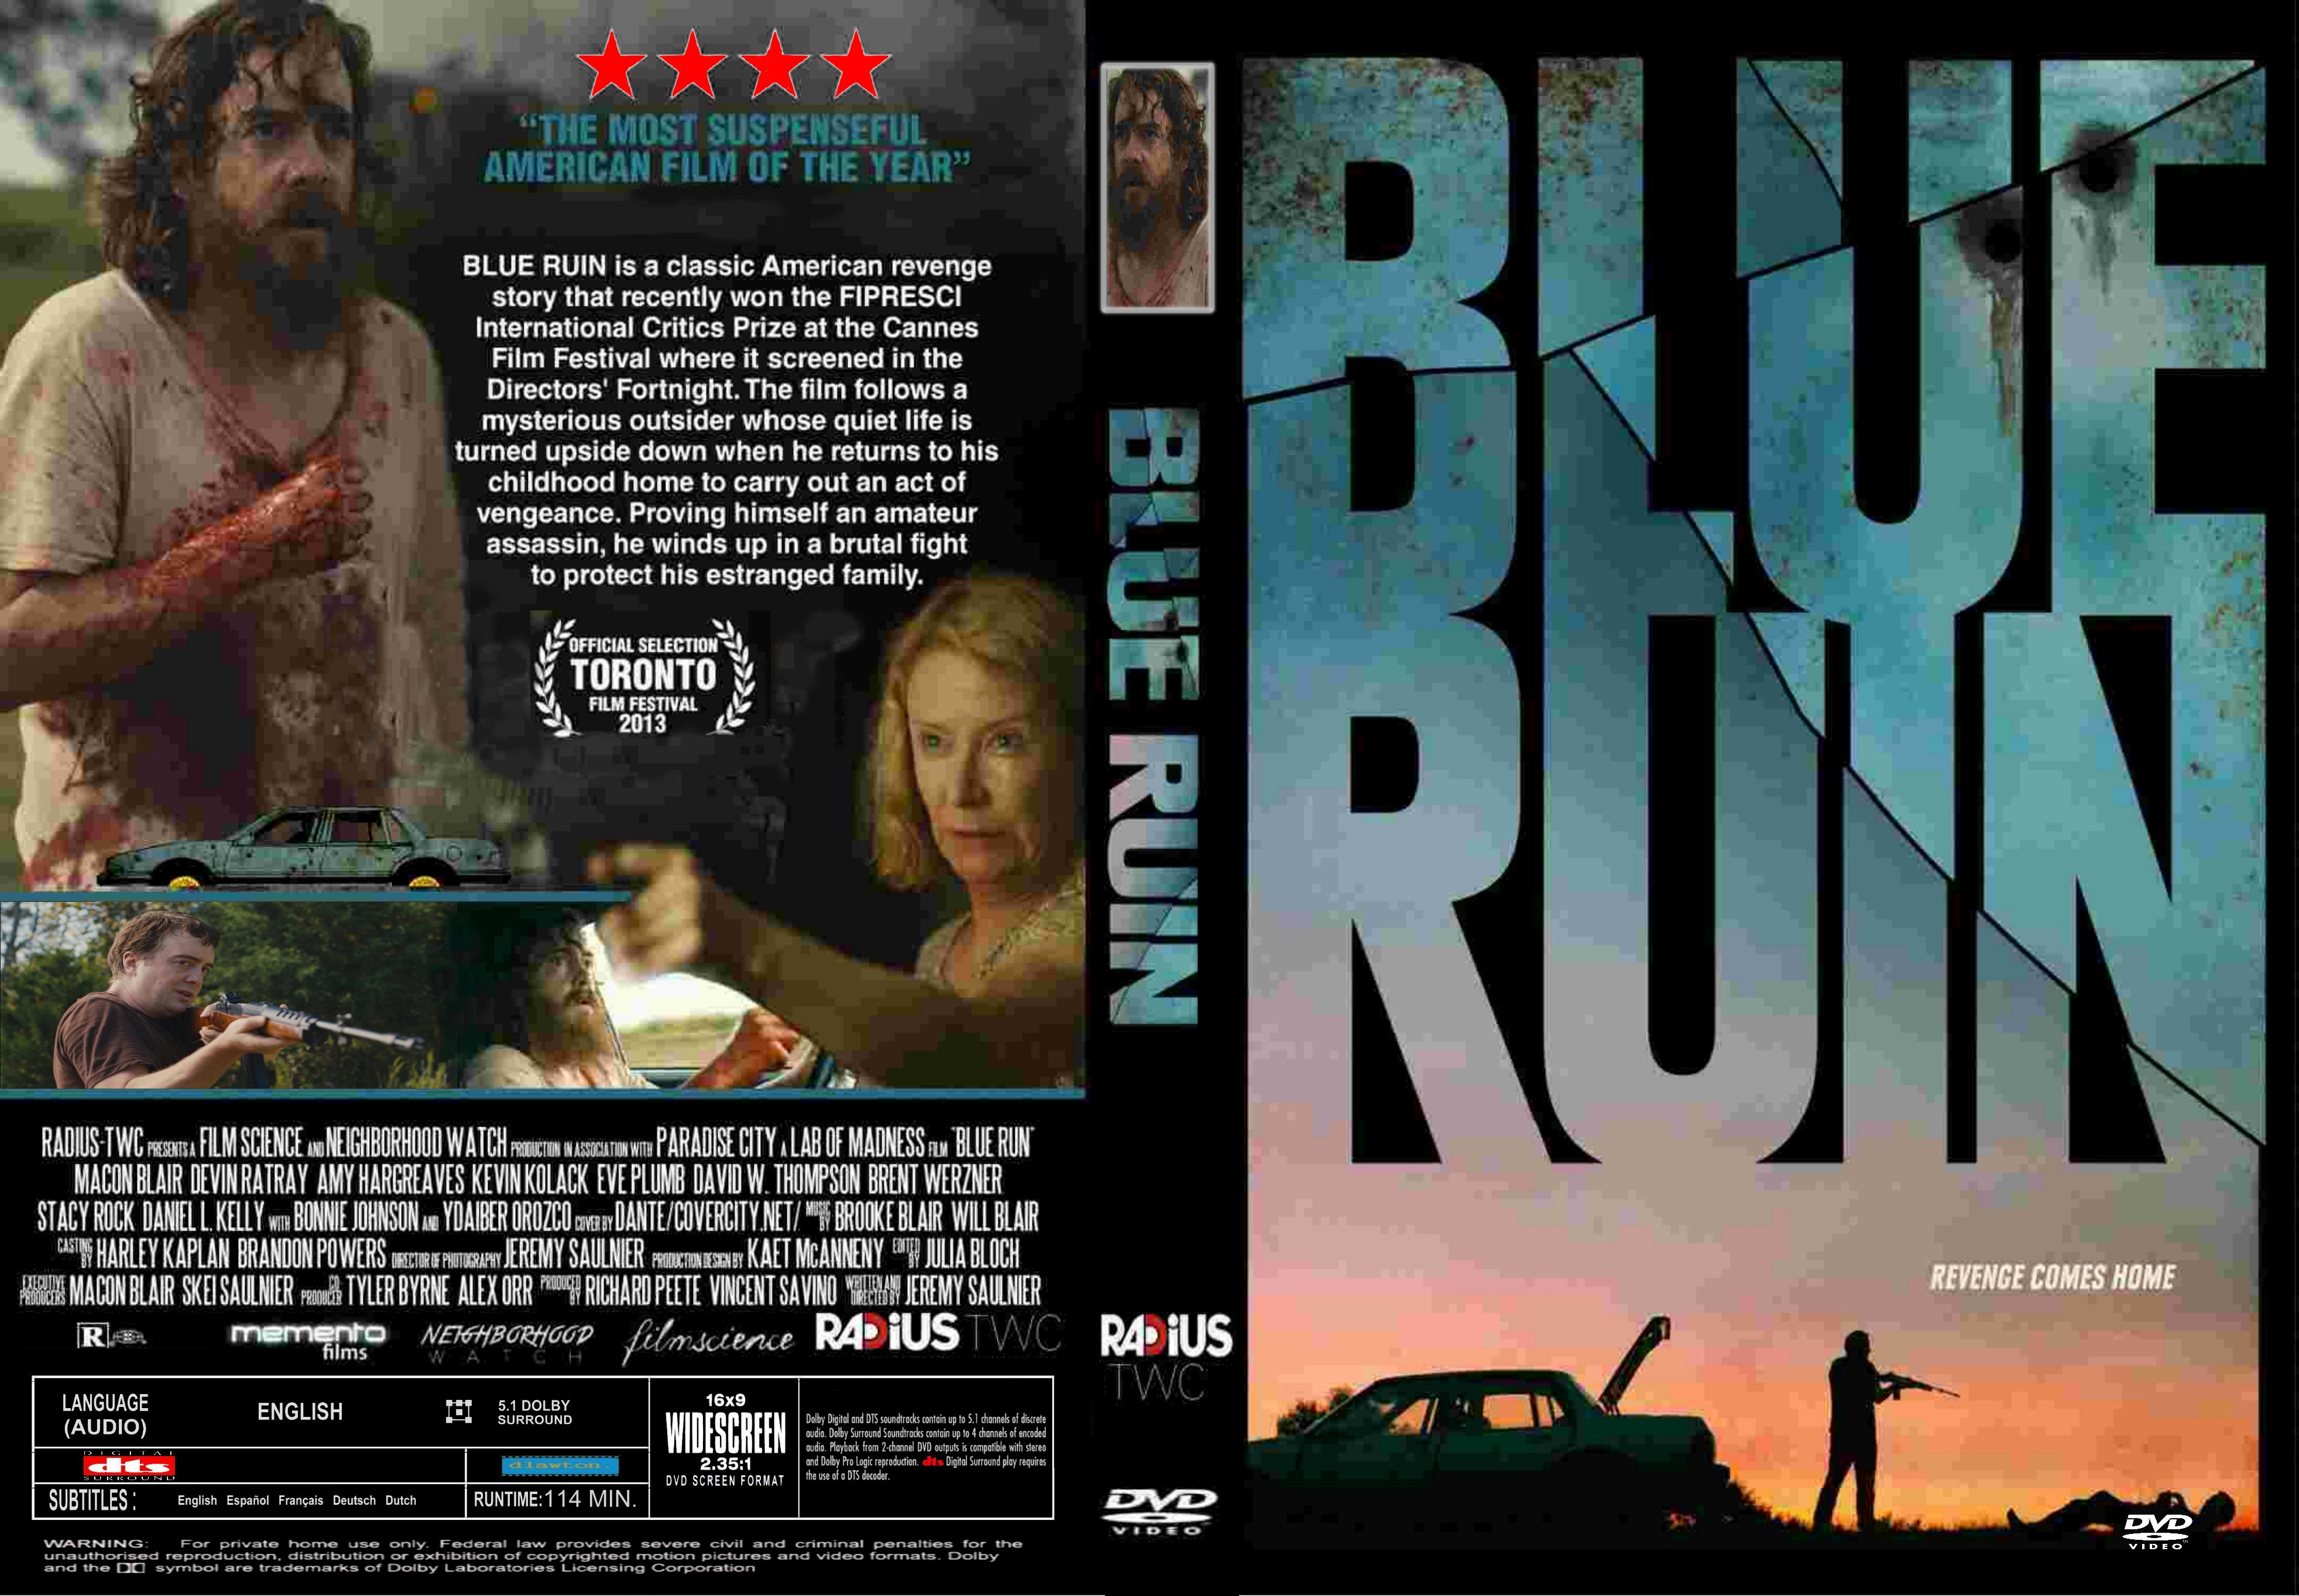 Images of Blue Ruin | 3928x2727